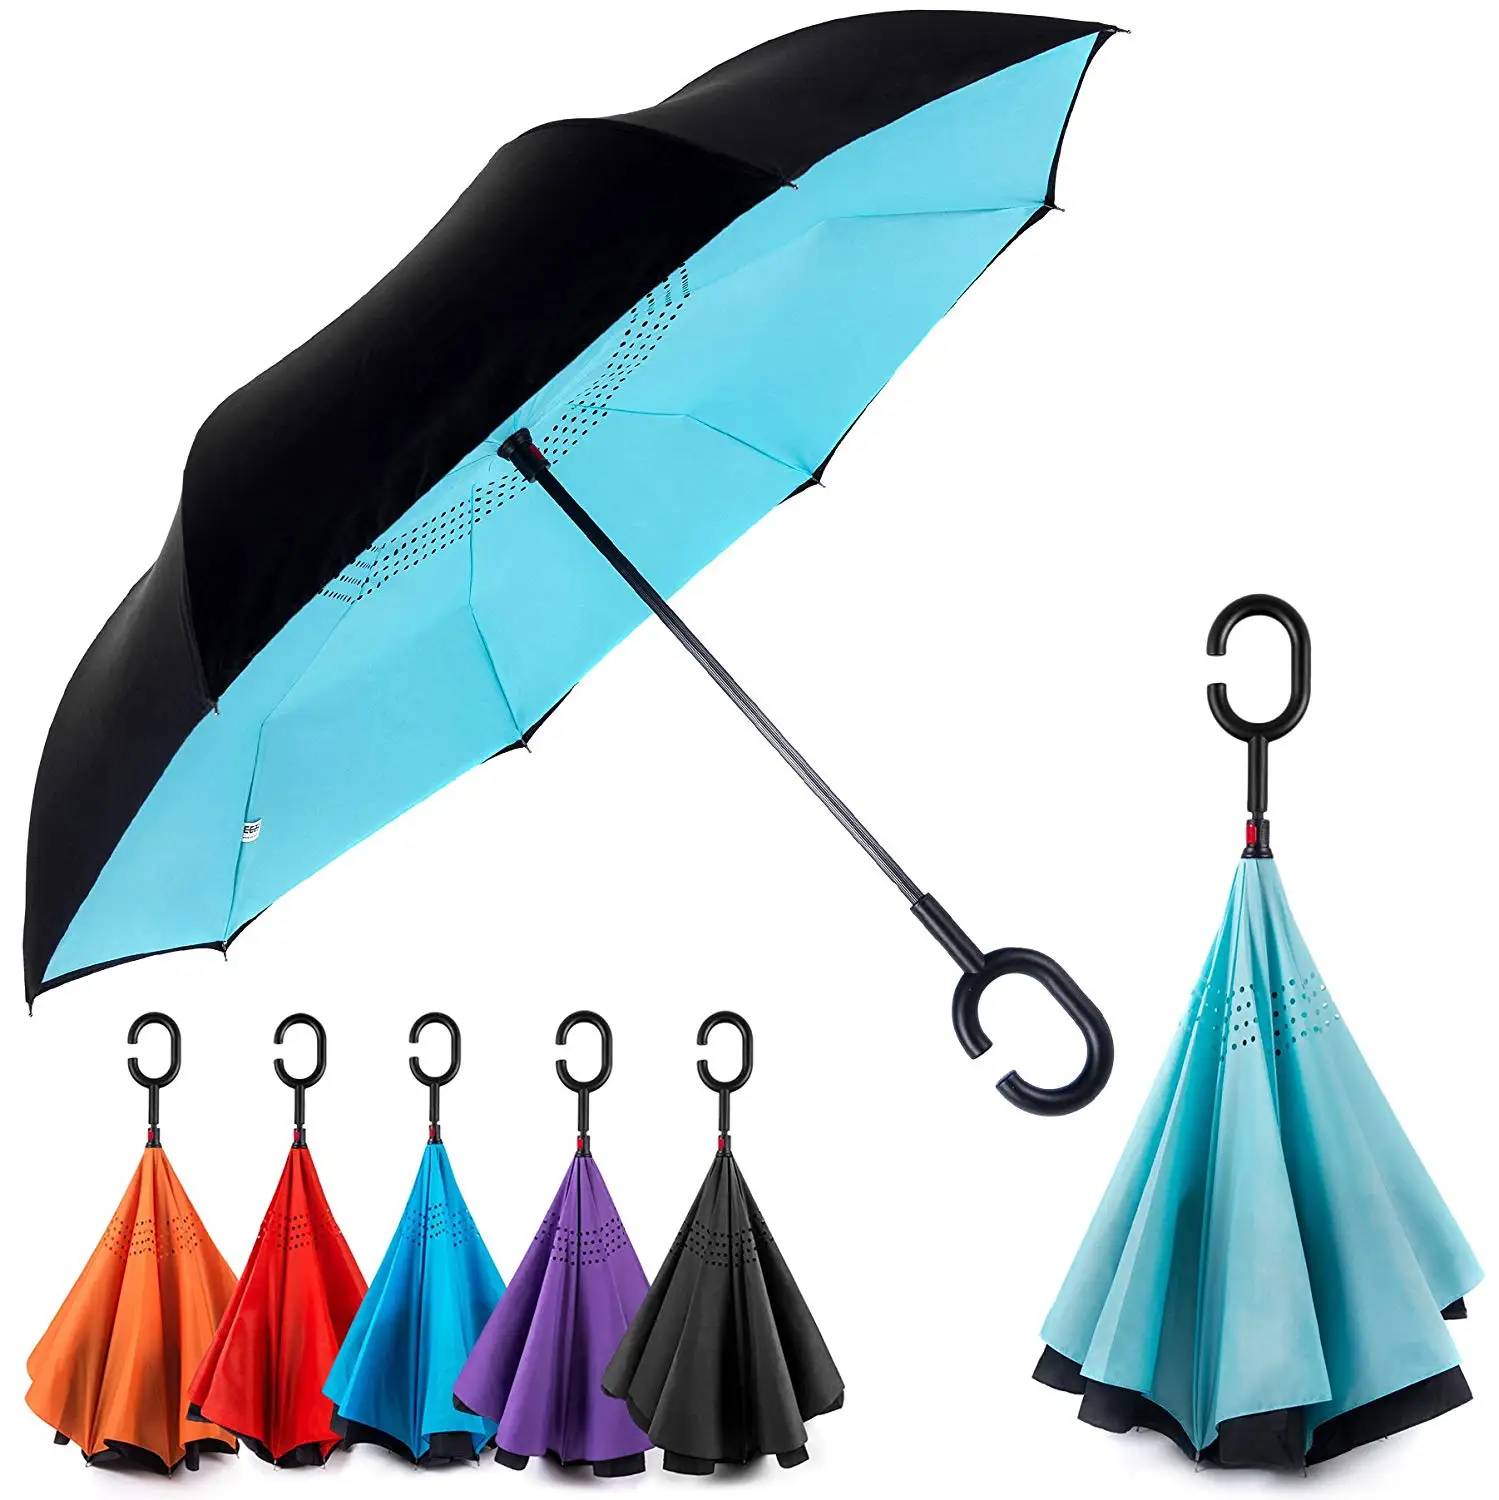 Black Satchpro Inverted Umbrella Reverse Open Windproof Umbrella with C Shaped Handle and Carrying Case 